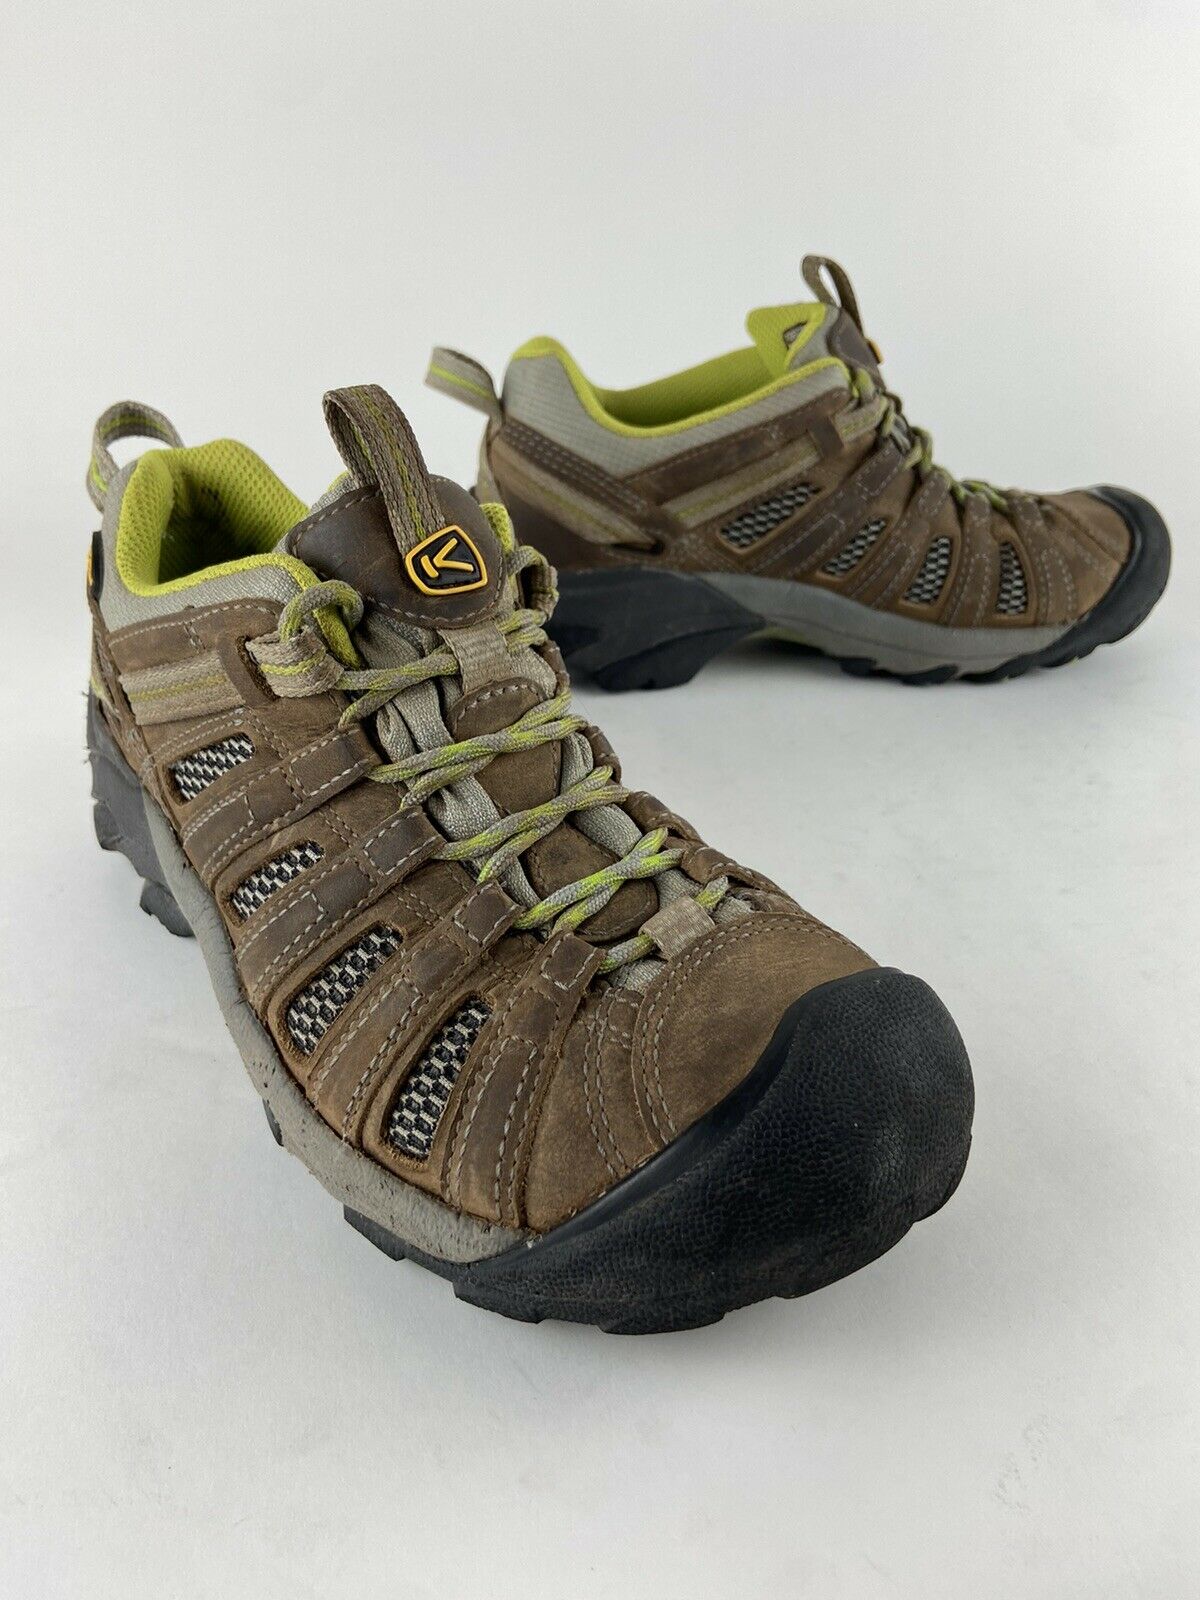 Keen Voyageur (Voyager) Low Hiking Shoes Women's 8 Brown Green